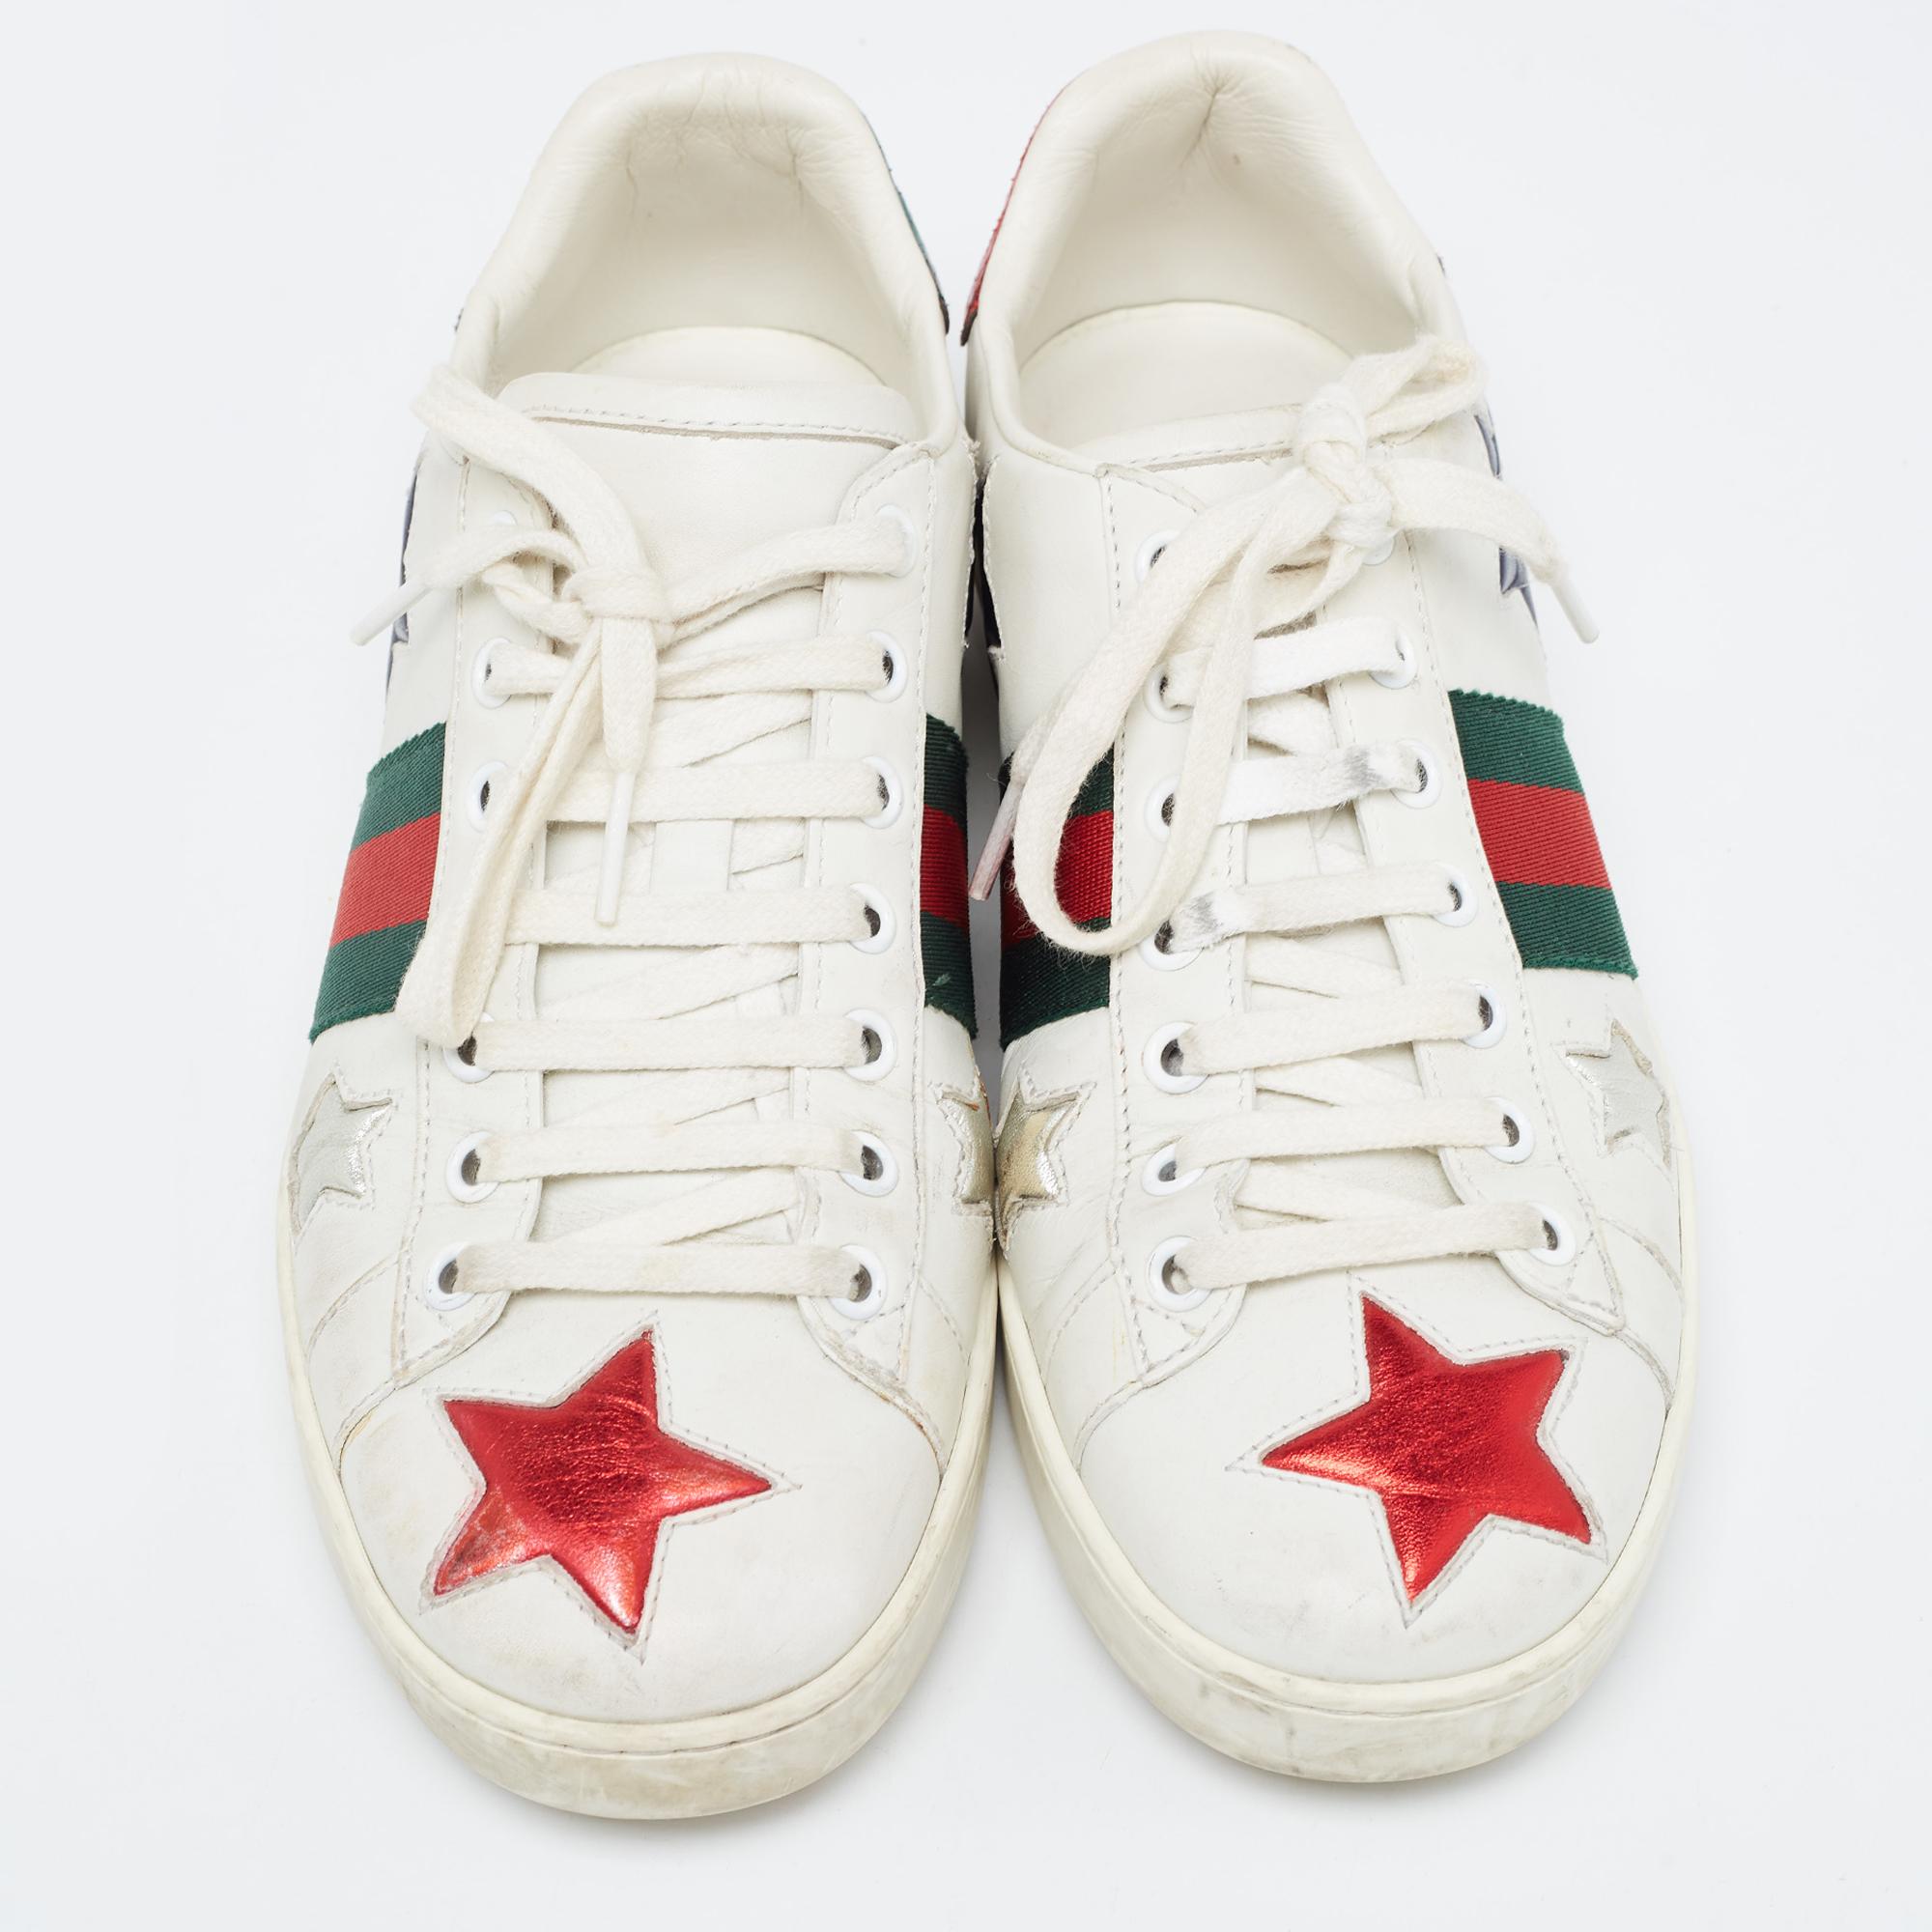 Stacked with signature details, this Gucci pair is rendered from leather with star motif on the exterior and these shoes have been fashioned with iconic web stripes on the sides. Complete with brand detailing on the counter, these shoes can be